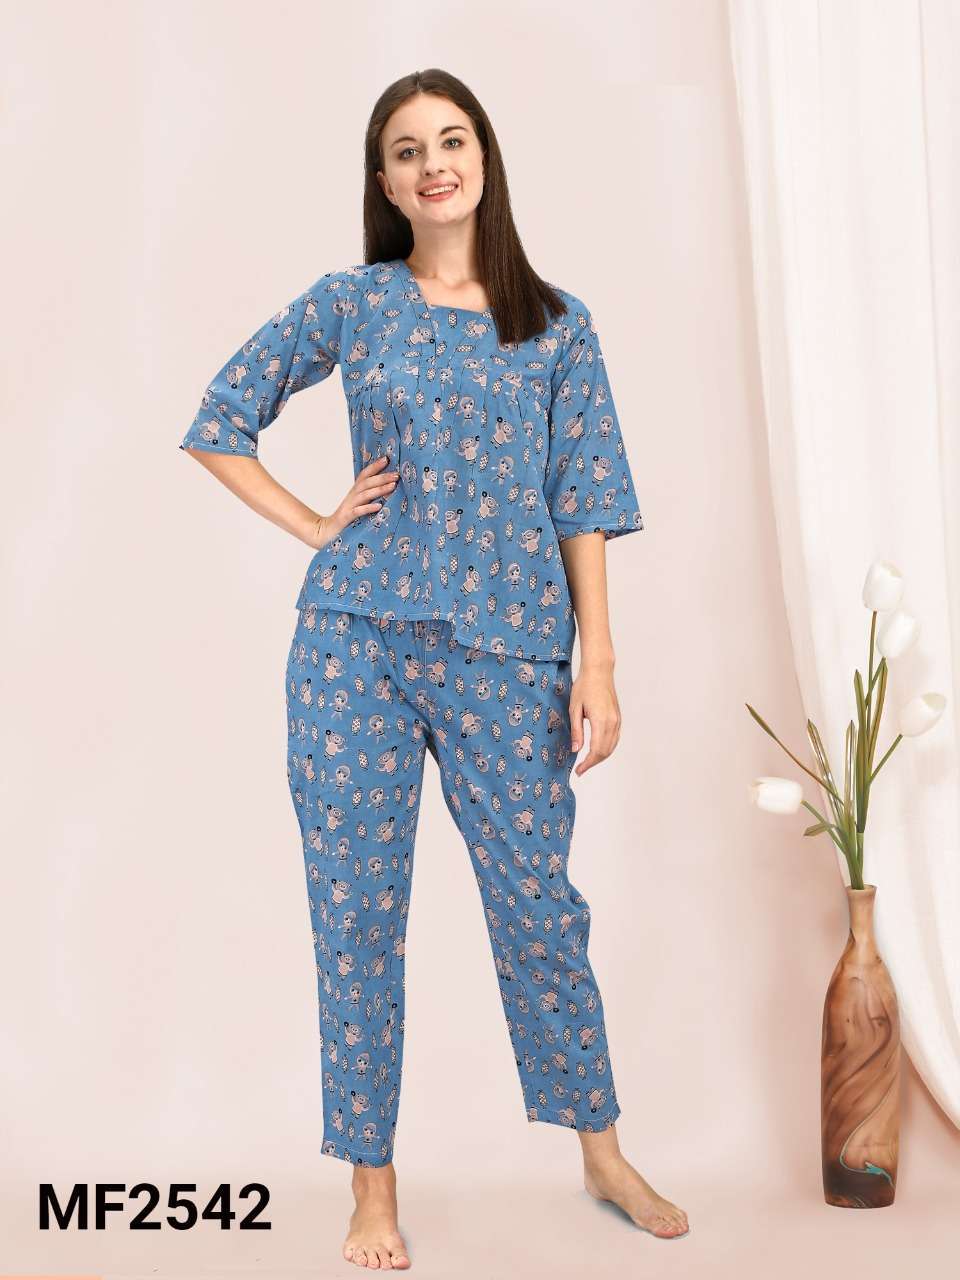 Buy Night Dresses for Women (Nighty, T-Shirt, Pajama, Gowns & More) Online  at Best Price - Daraz.pk